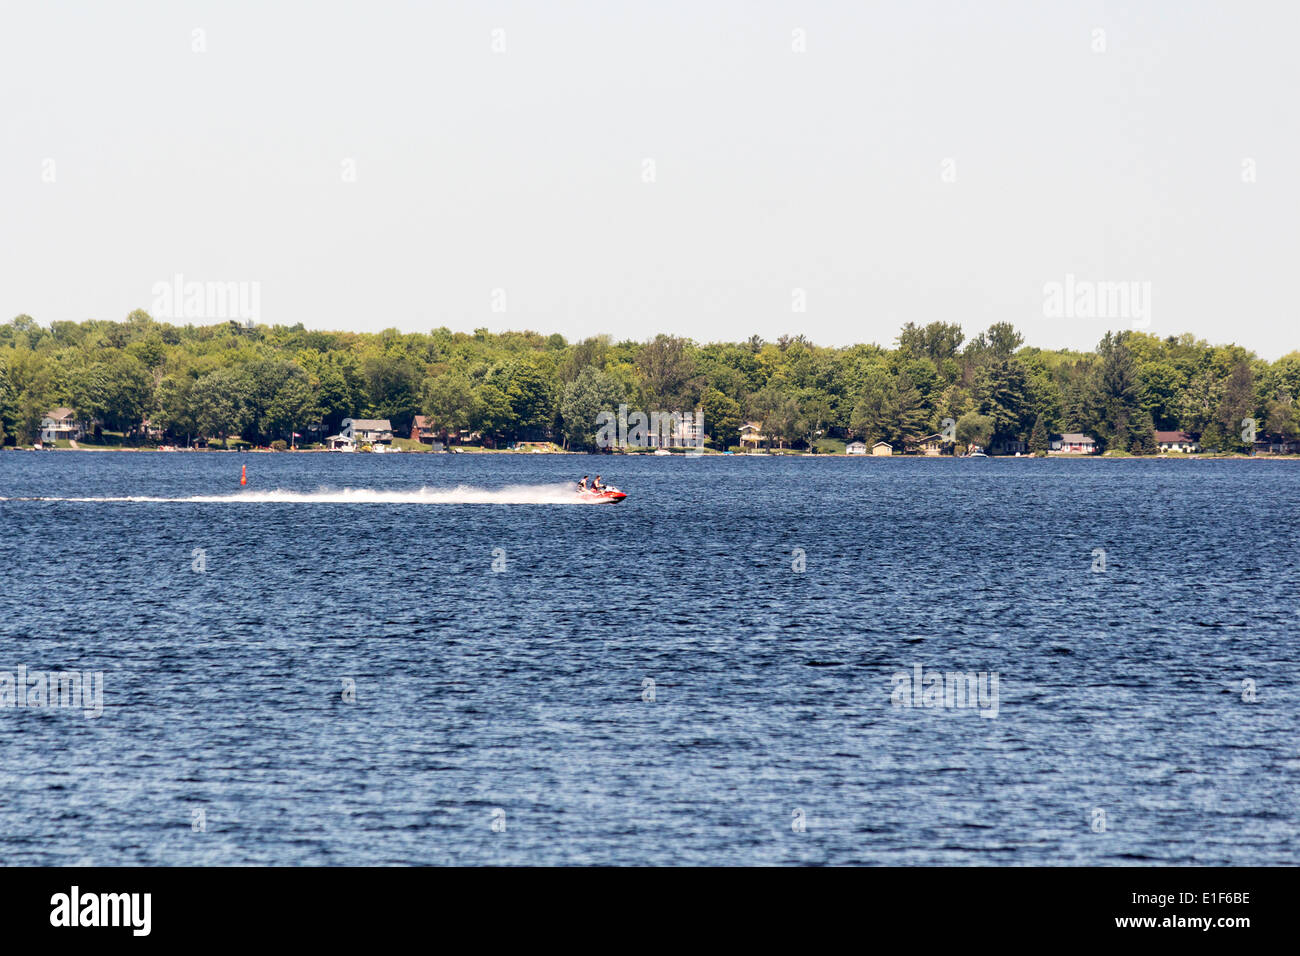 View of Cameron lake where you can see two men going fast on a Sea-doo personal watercraft Stock Photo